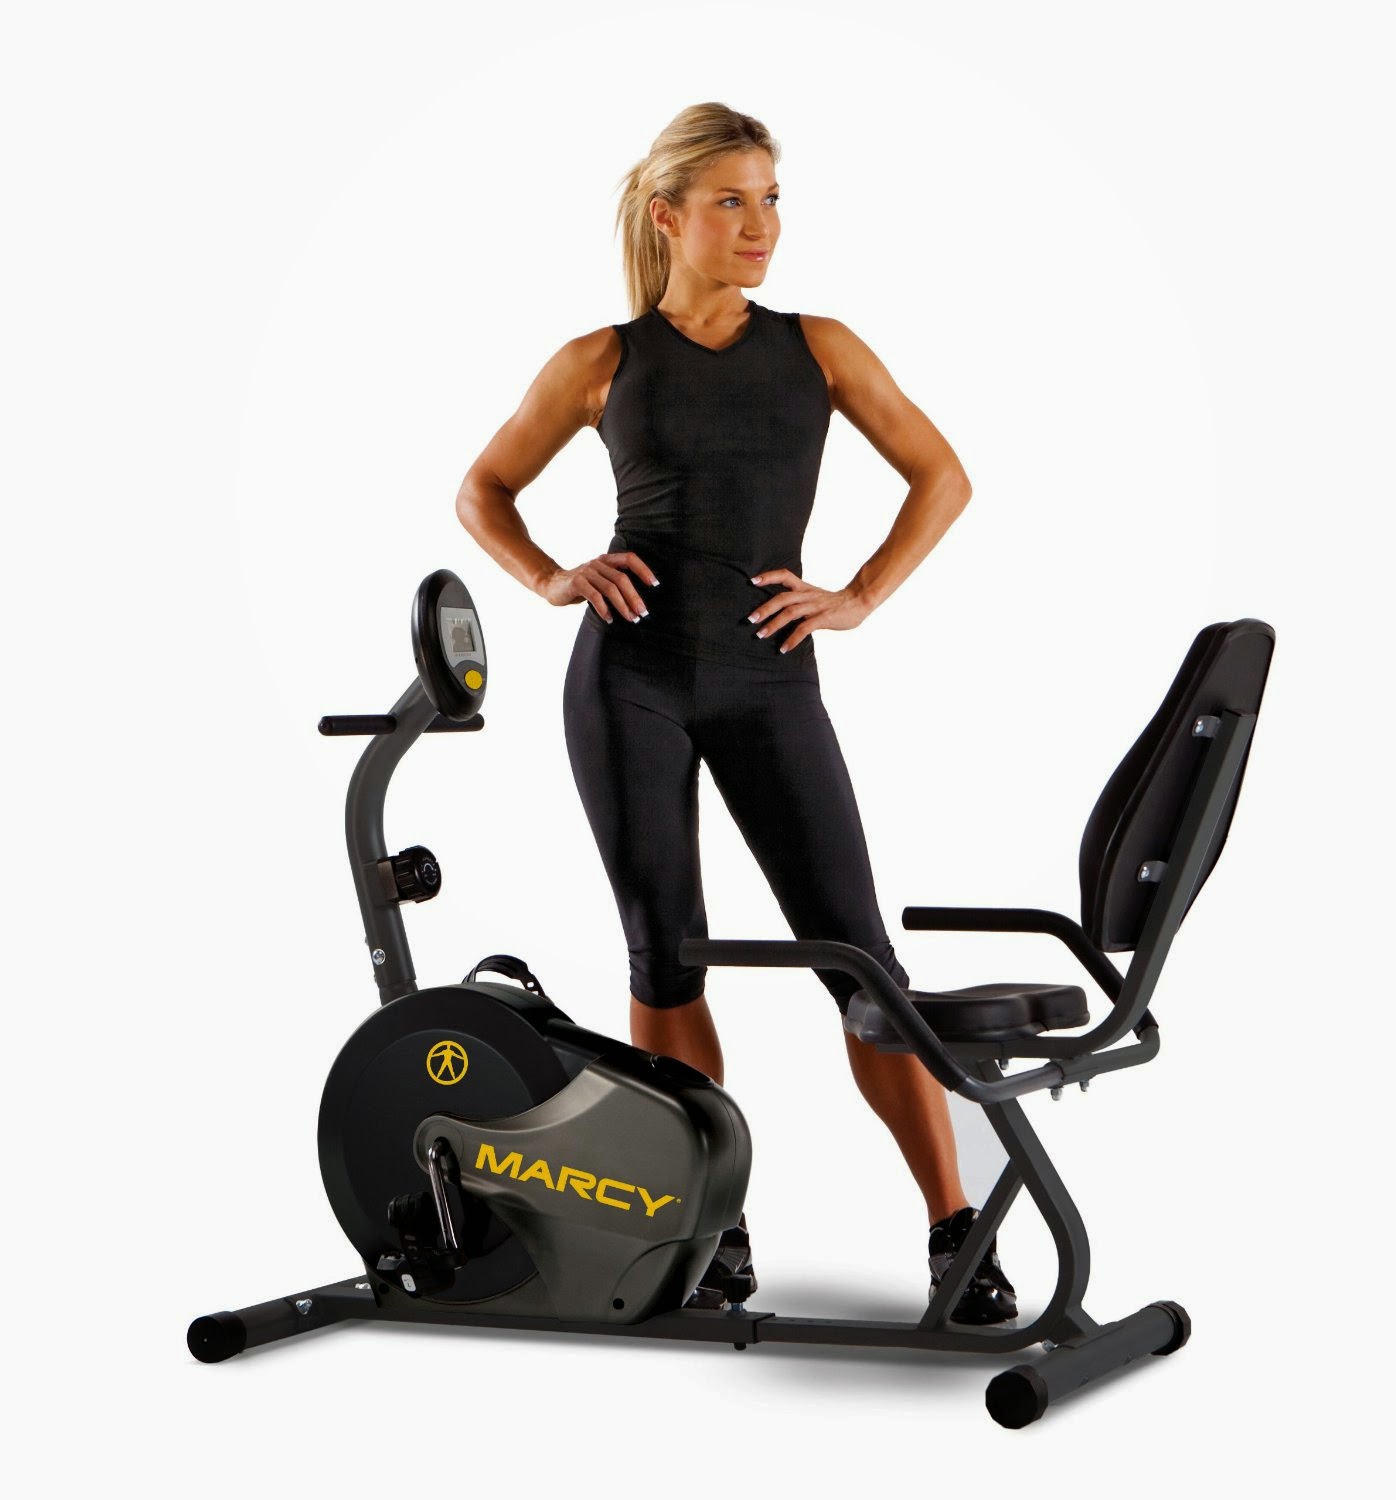 Marcy NS 716R Recumbent Magnetic Exercise Bike, review, 8 levels of magnetic resistance, lumbar support seat, computer displays workout stats time, distance, speed, calories burned